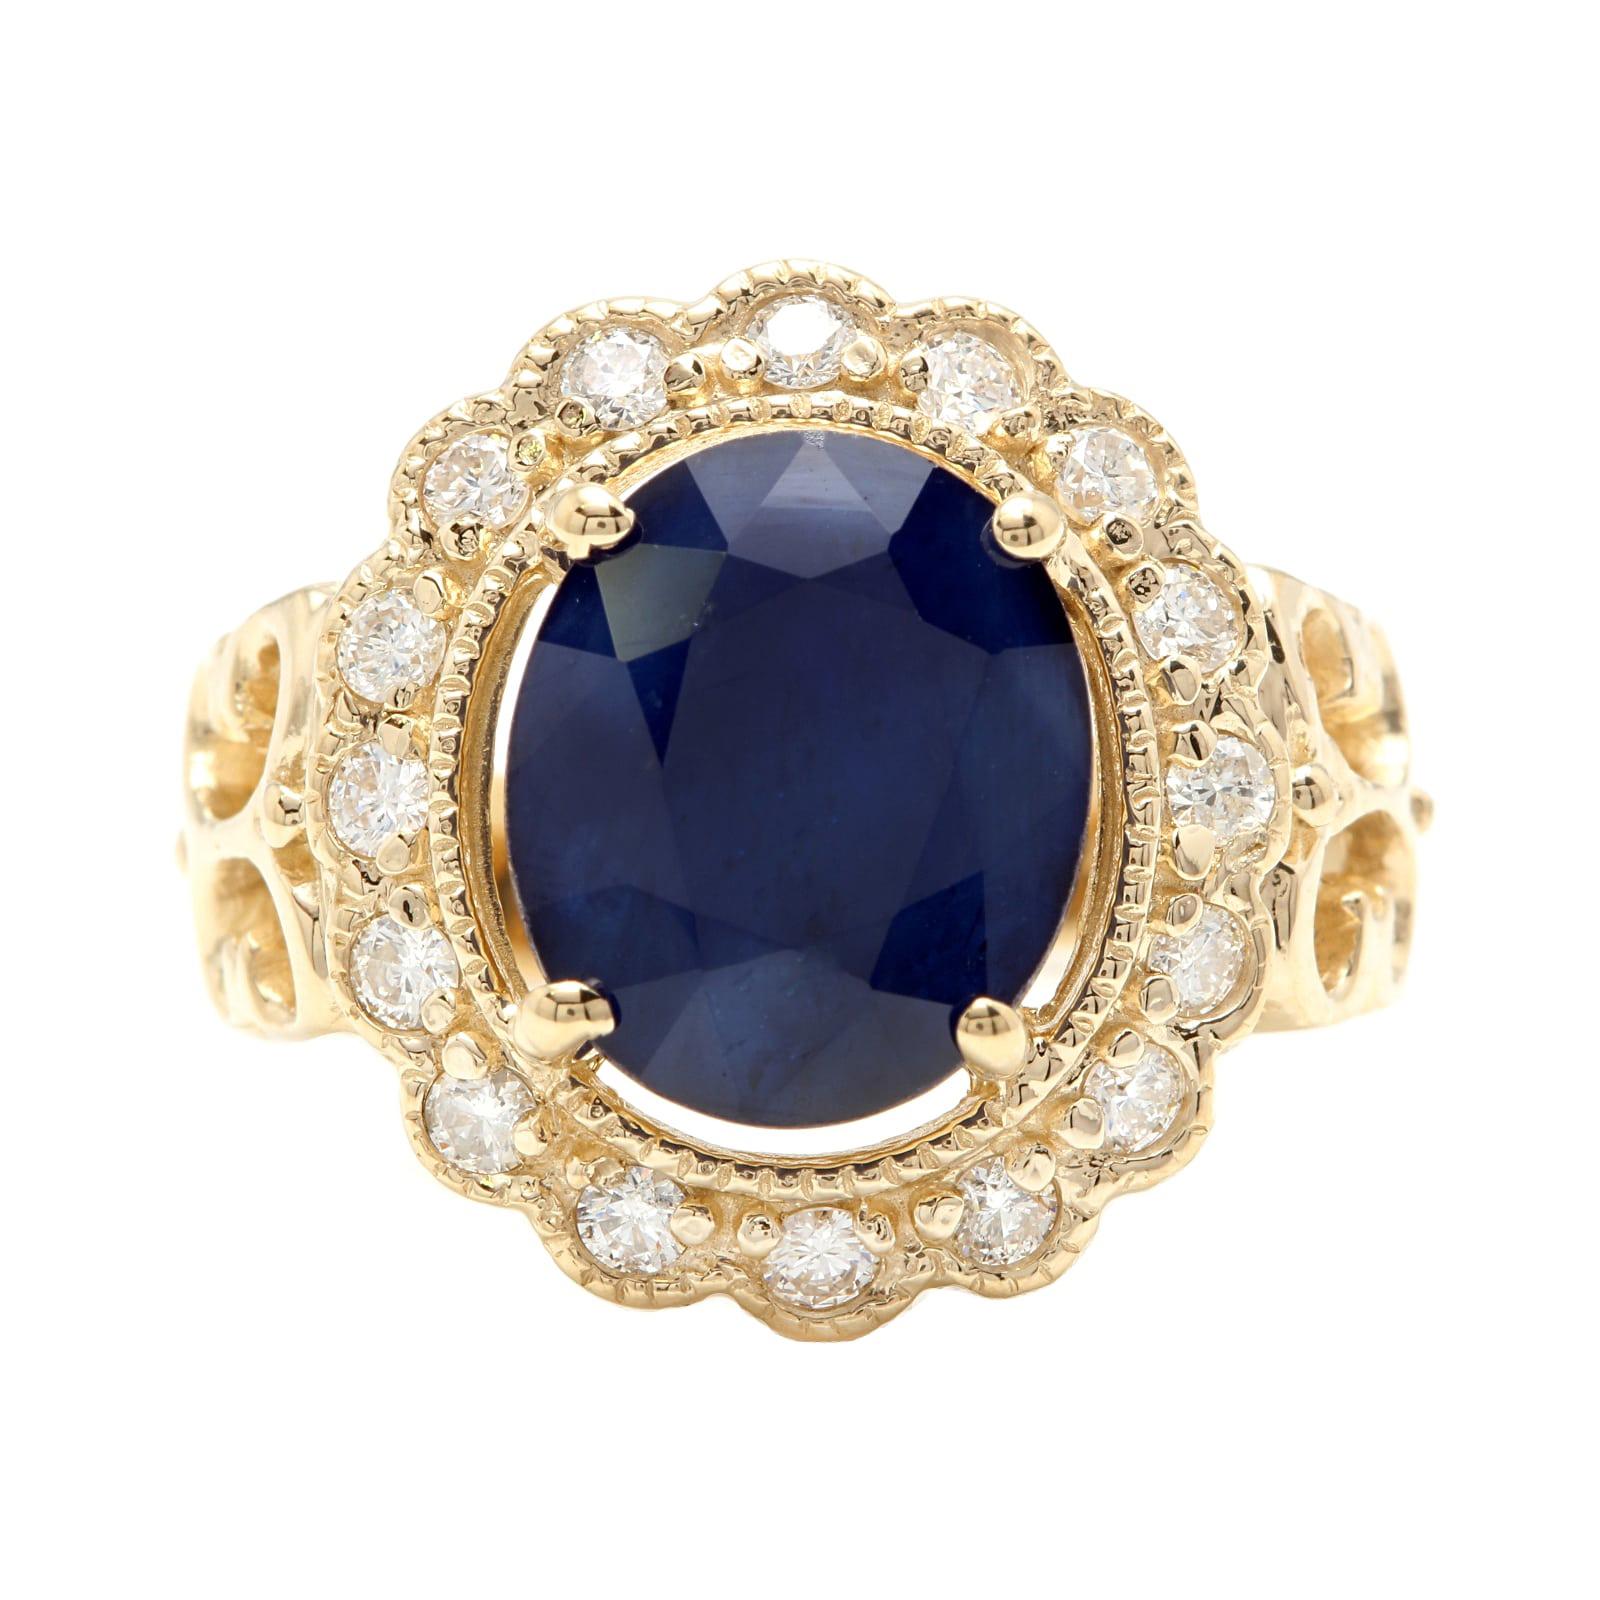 7.50 Natural Blue Sapphire & Diamond 14k Solid Yellow Gold Ring